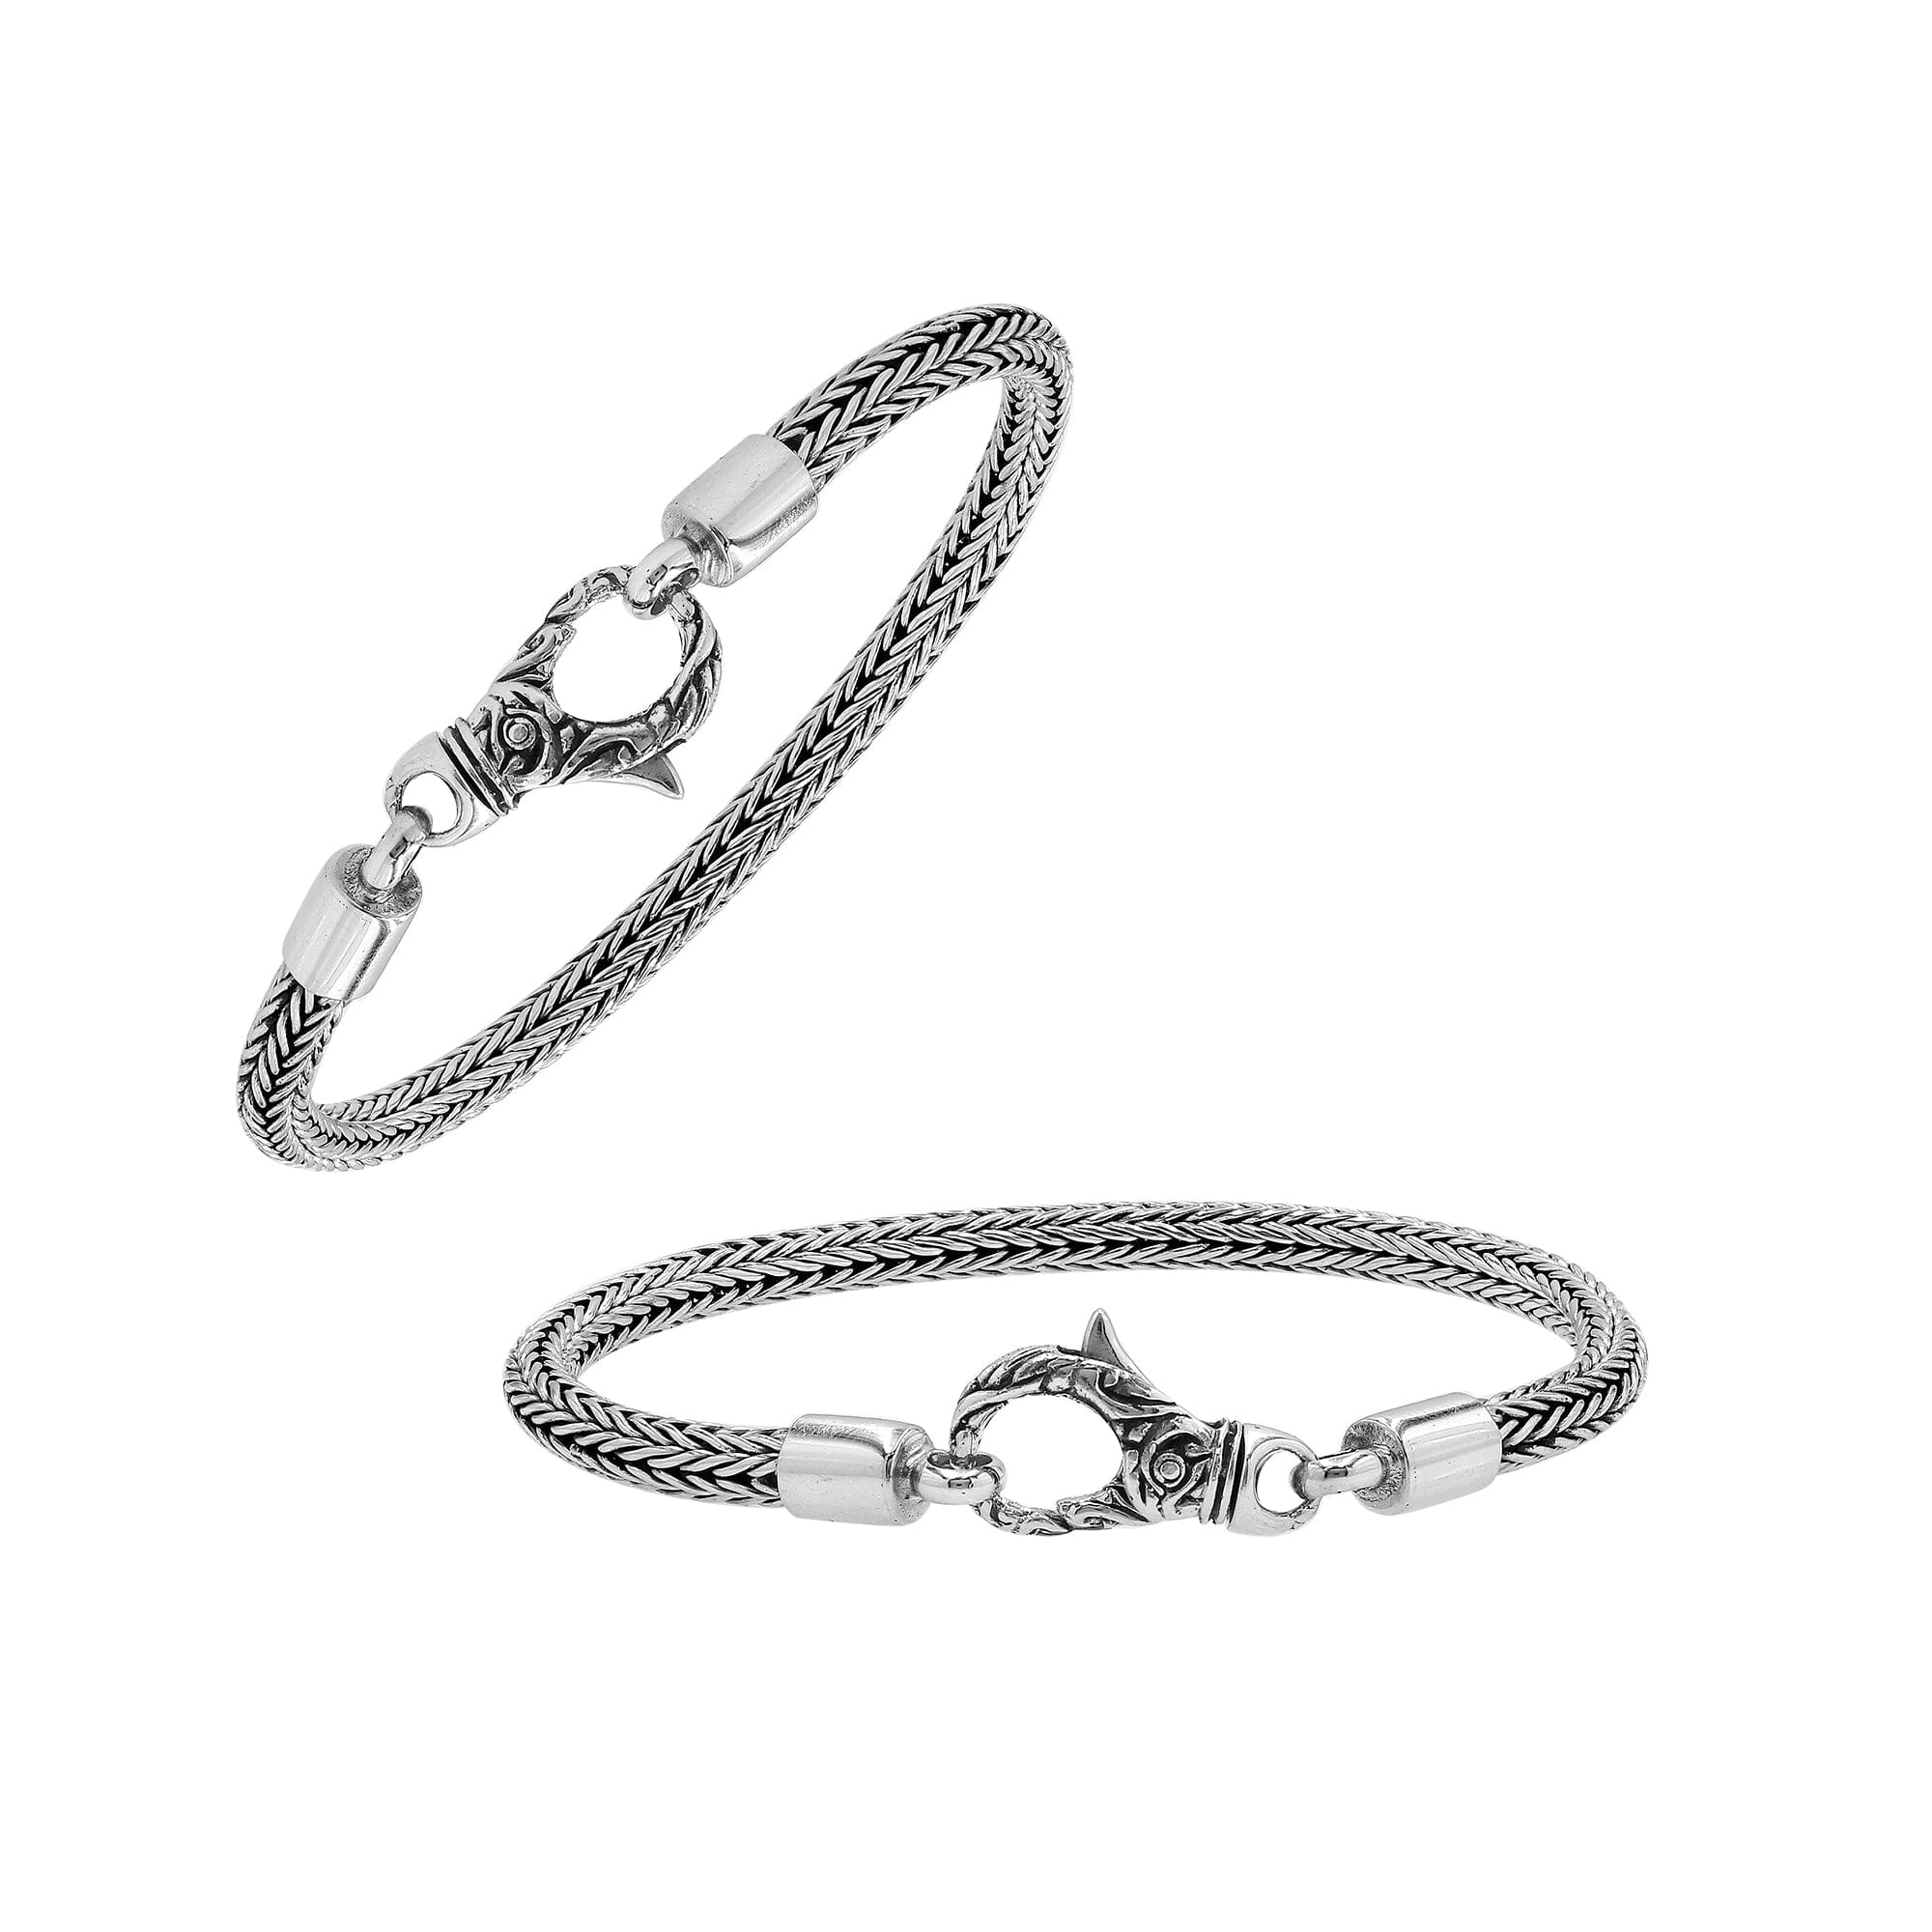 Buy THE MEN THING 8mm Pure Stainless Steel Double Ring Bracelet, European  Style - 8 inch with Adjustable Lobster Claw Buckle for Men & Boy Online at  Best Prices in India - JioMart.